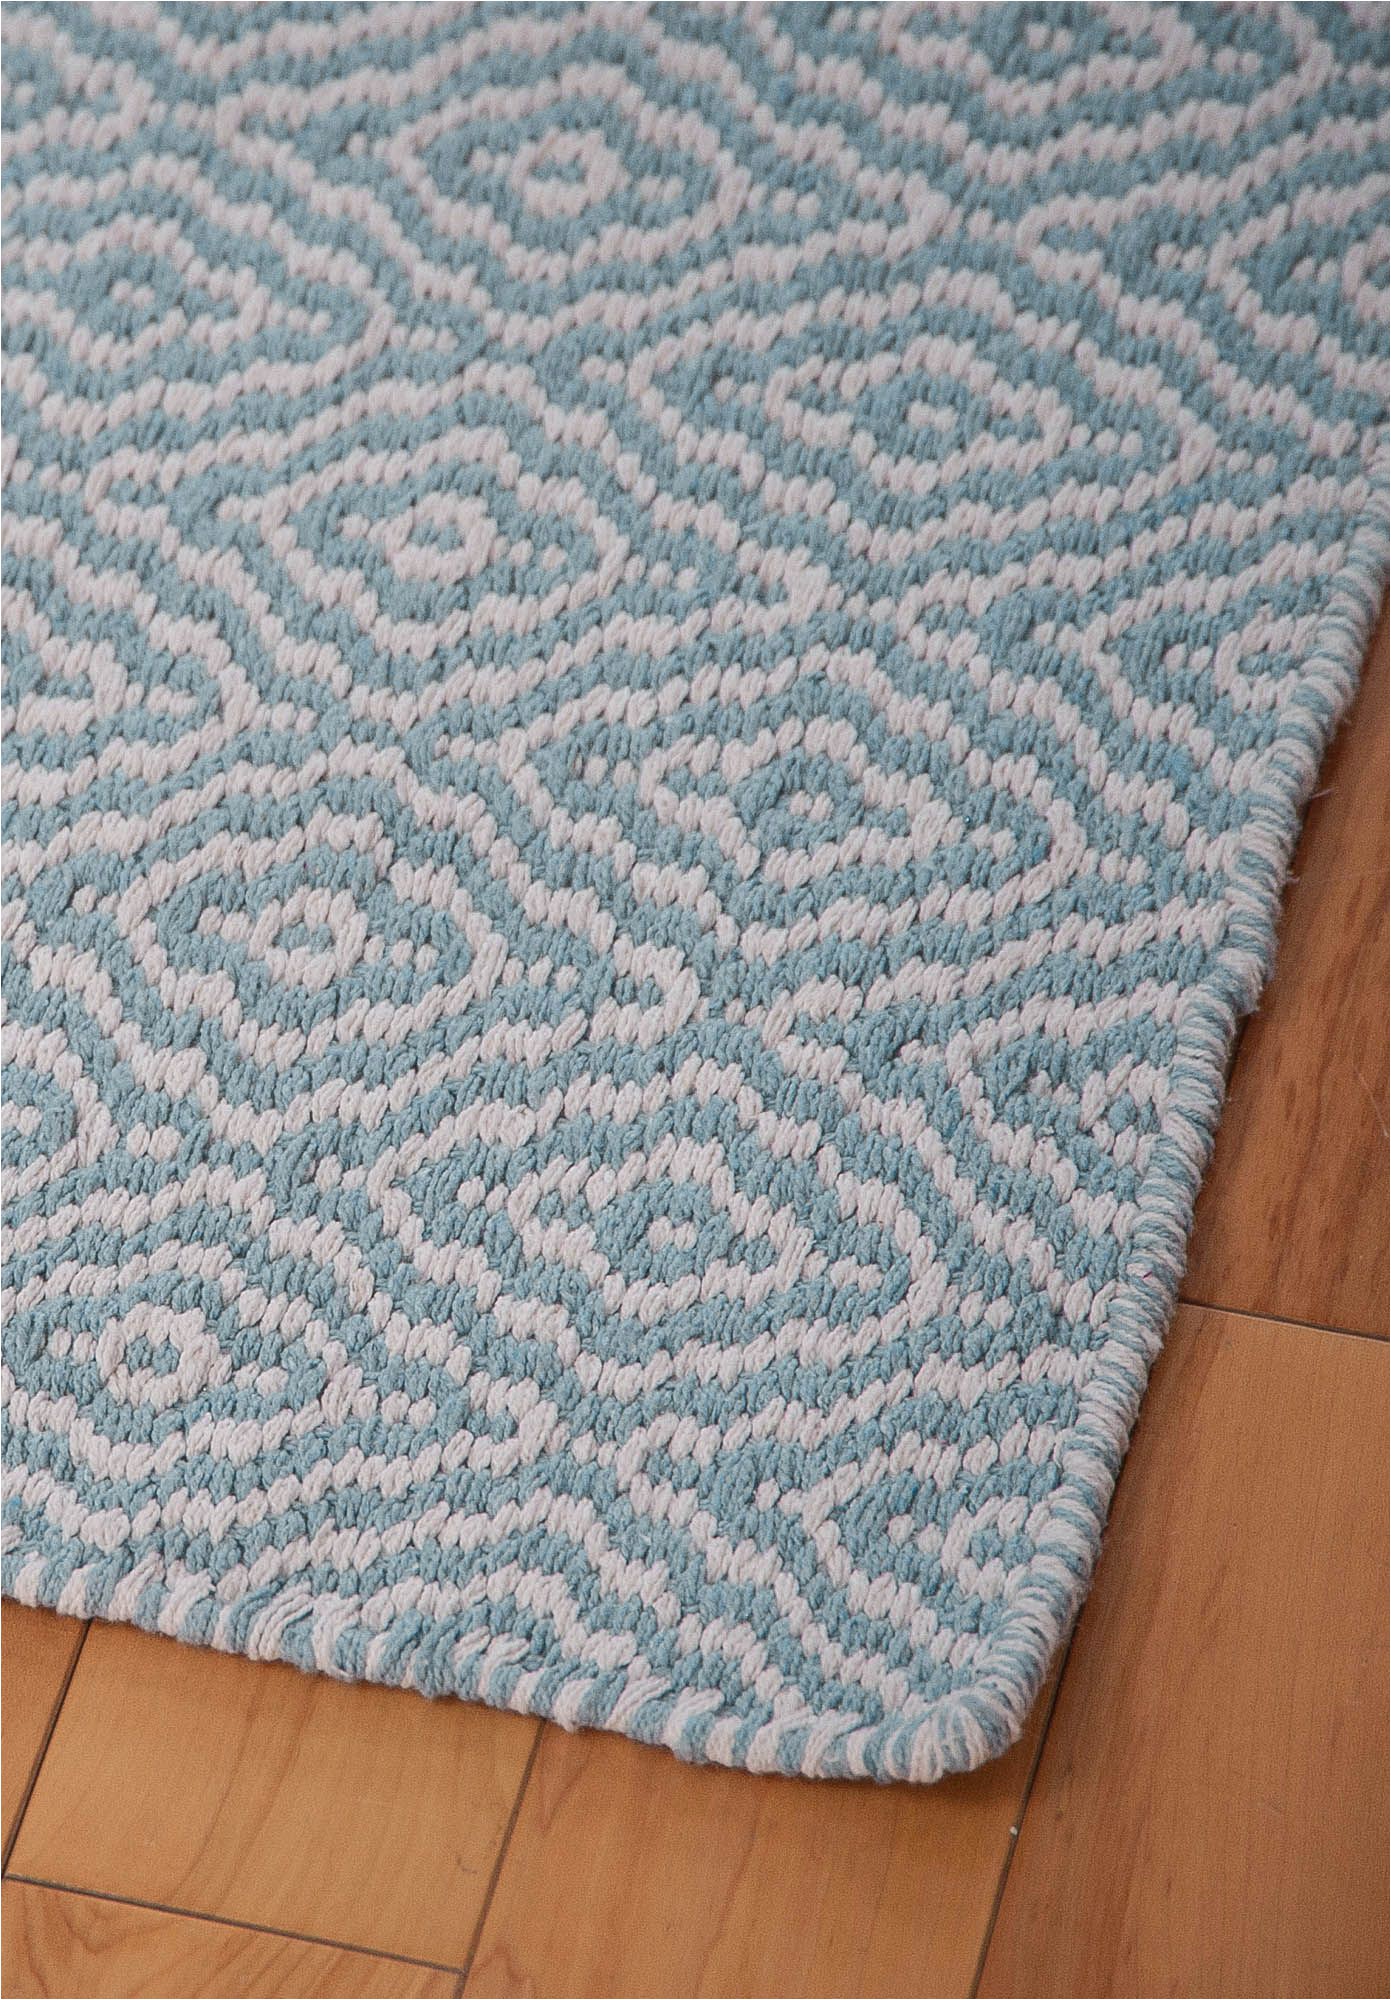 Blue and White Cotton Rug Savannah Eco Cotton Rug Light Blue and White Hook & Loom